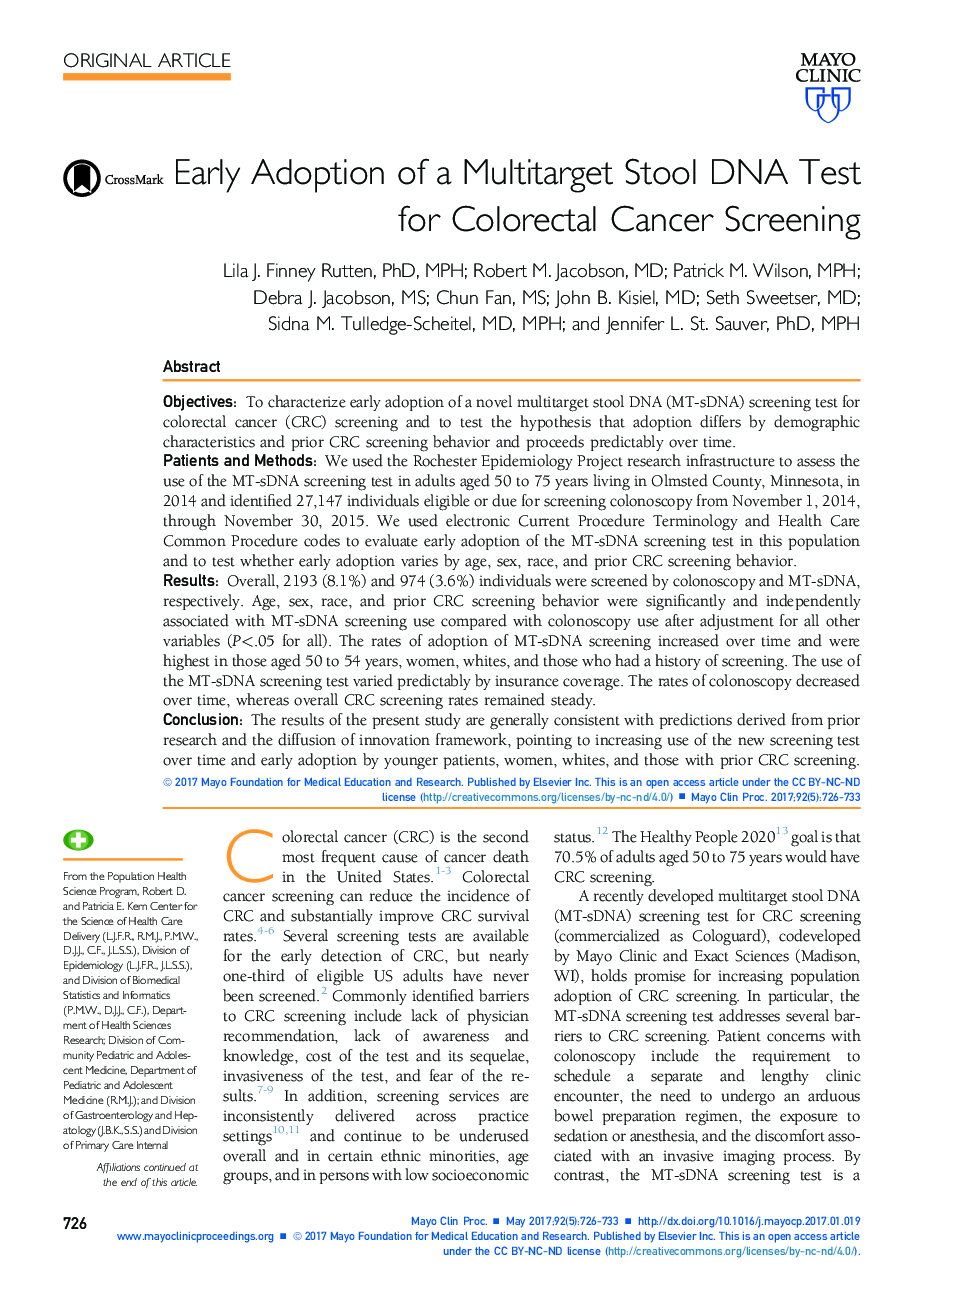 Early Adoption of a Multitarget Stool DNA Test for Colorectal Cancer Screening